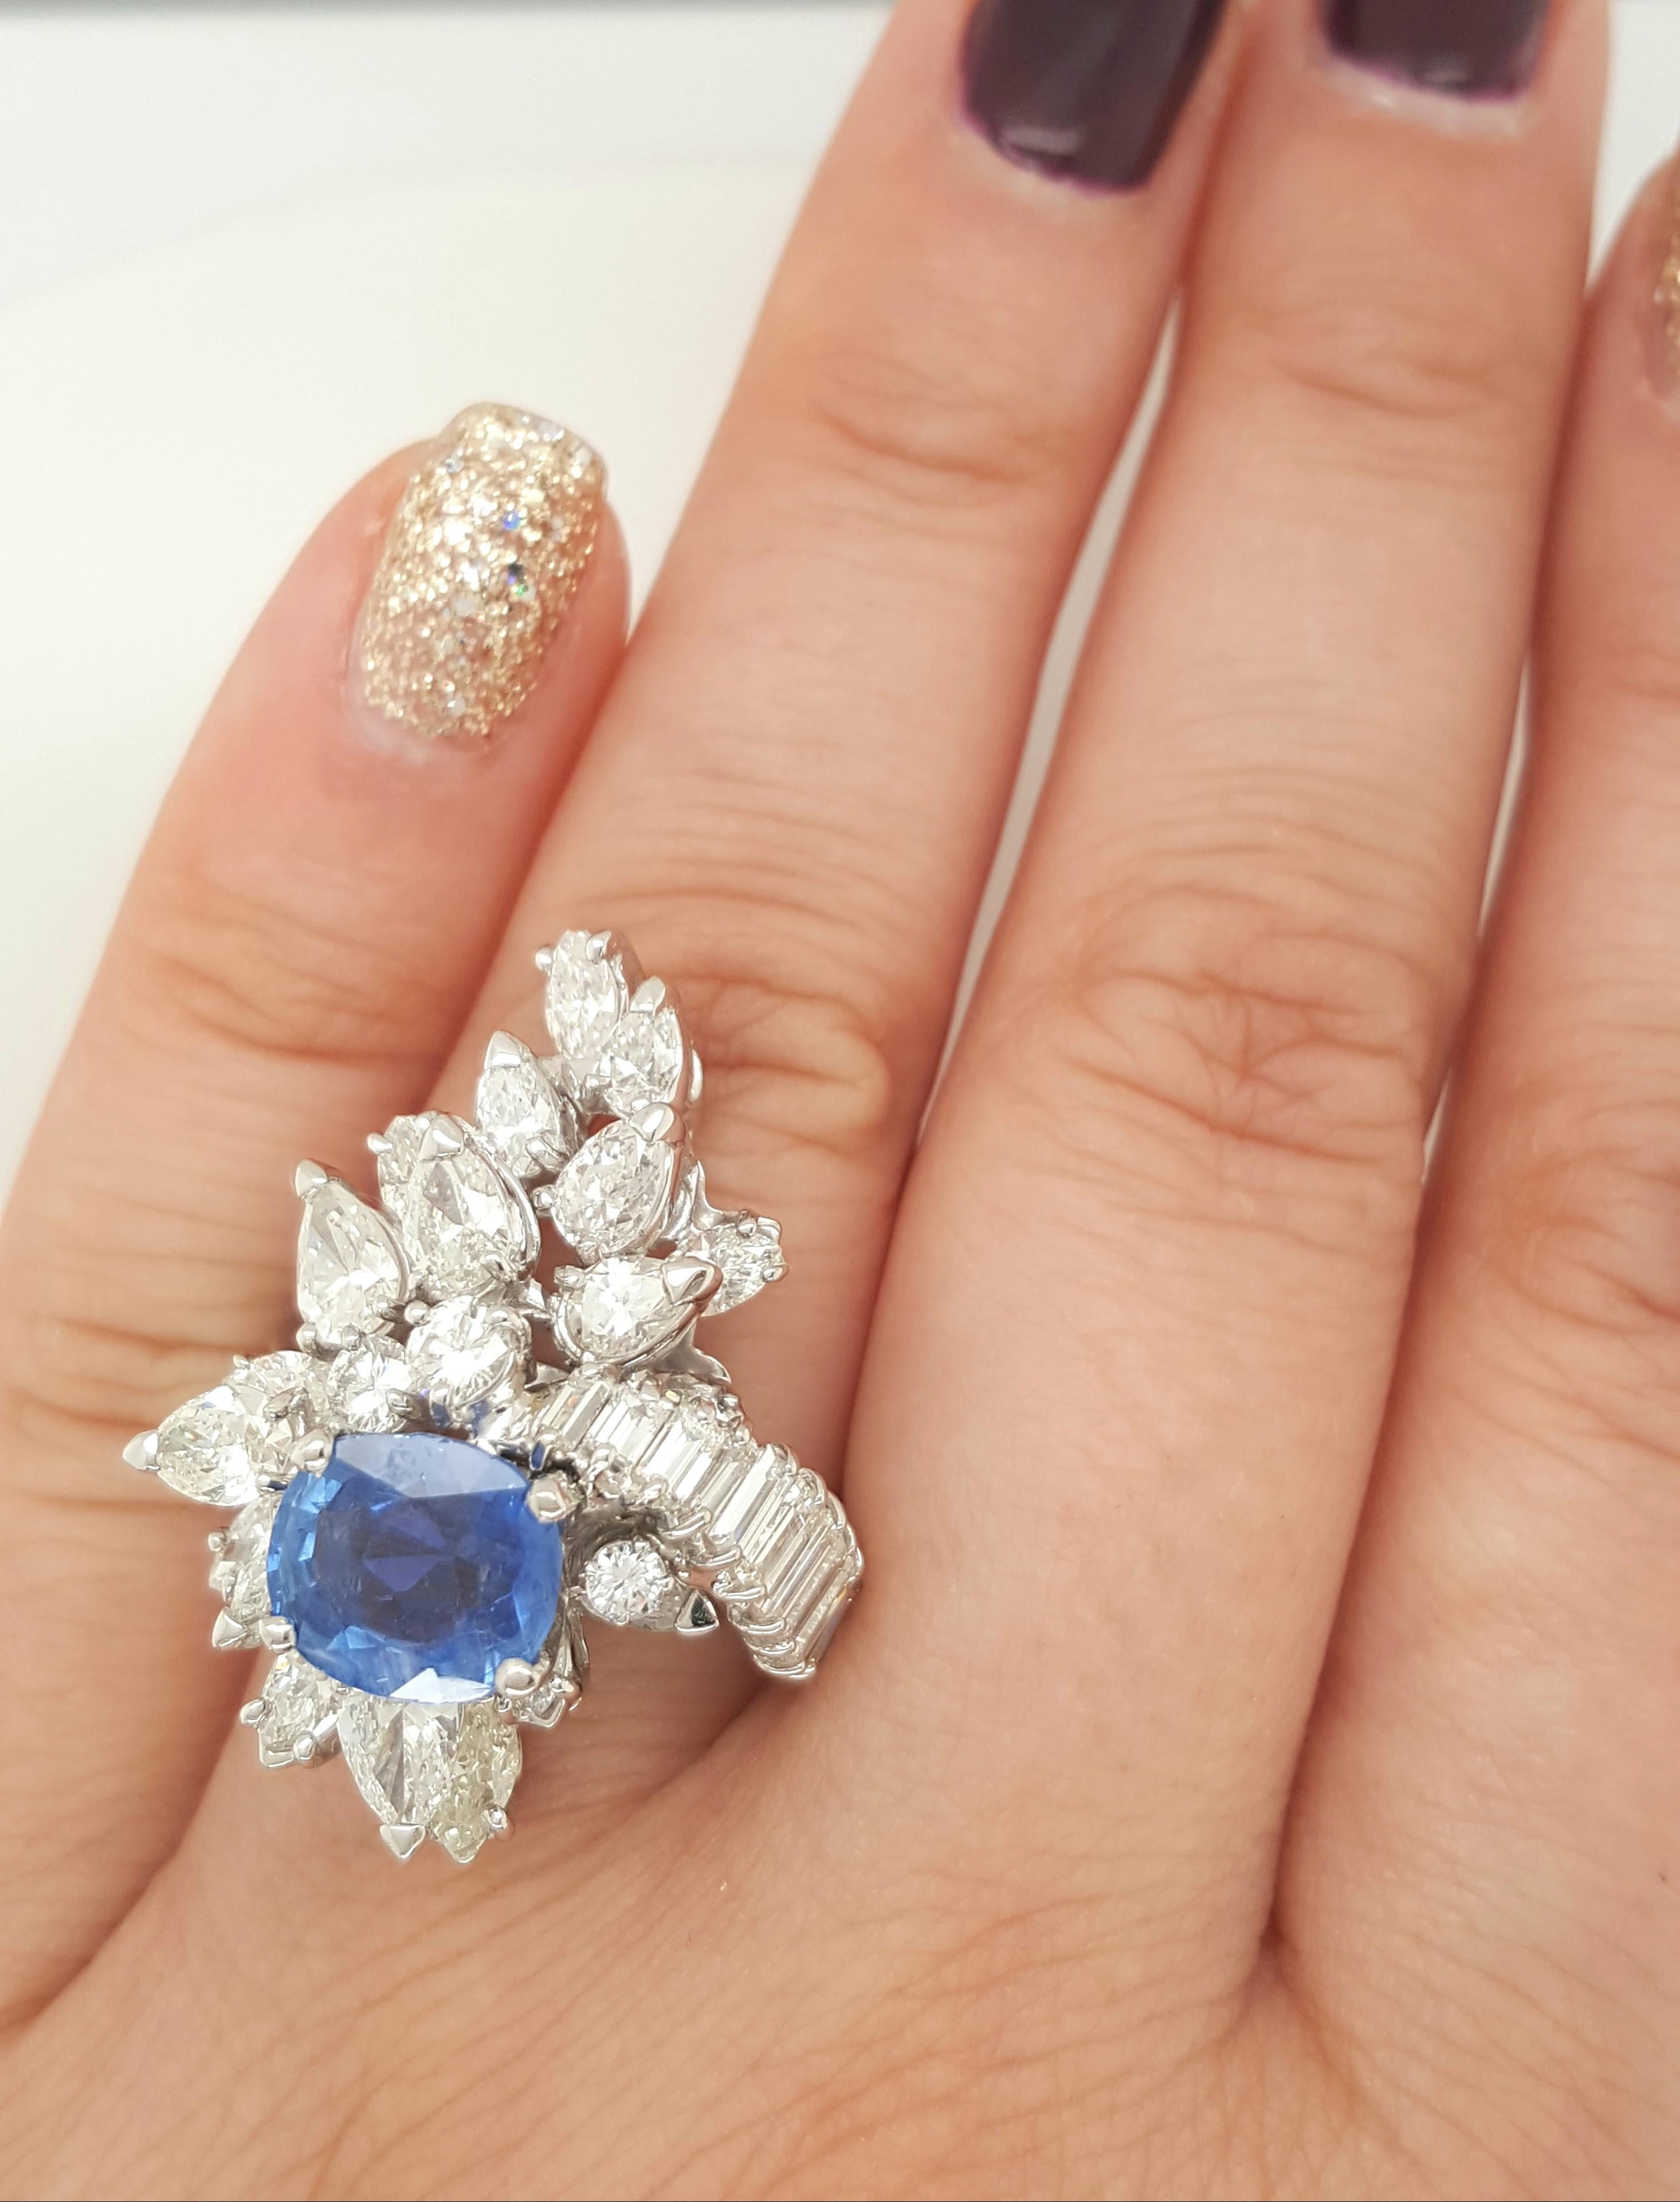 An original true vintage sapphire and diamond cocktail ring! The center is a natural GIA Certified 2.26 carat Burma NO heat oval blue sapphire. It is accented 12 Baguette, 4 Round, 11 Pear and 9 Marquise cut diamonds weighing 5.07 carats total. This